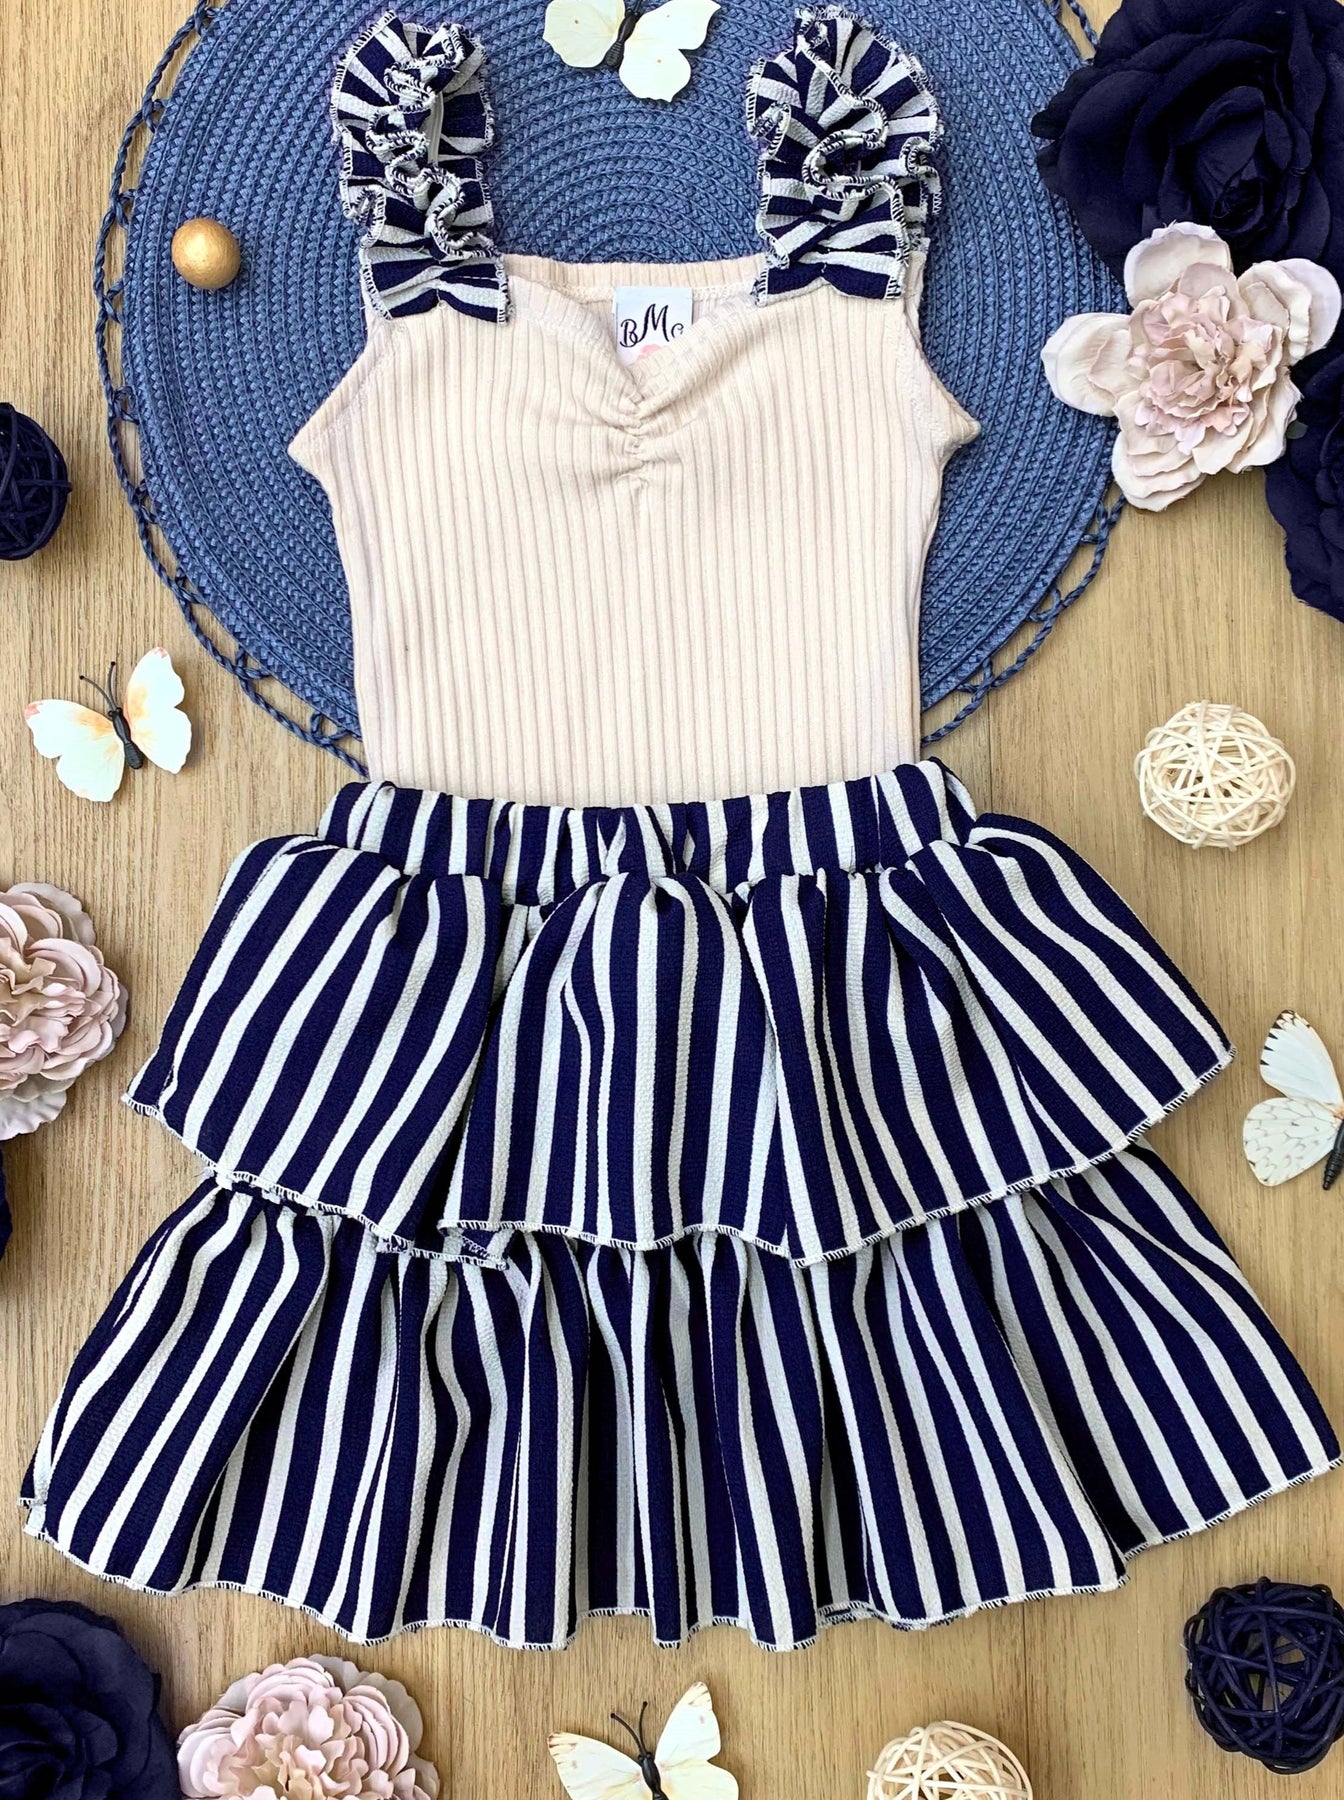 Toddler Spring Outfits | Girls Striped Ribbed Top & Tiered Skirt Set ...